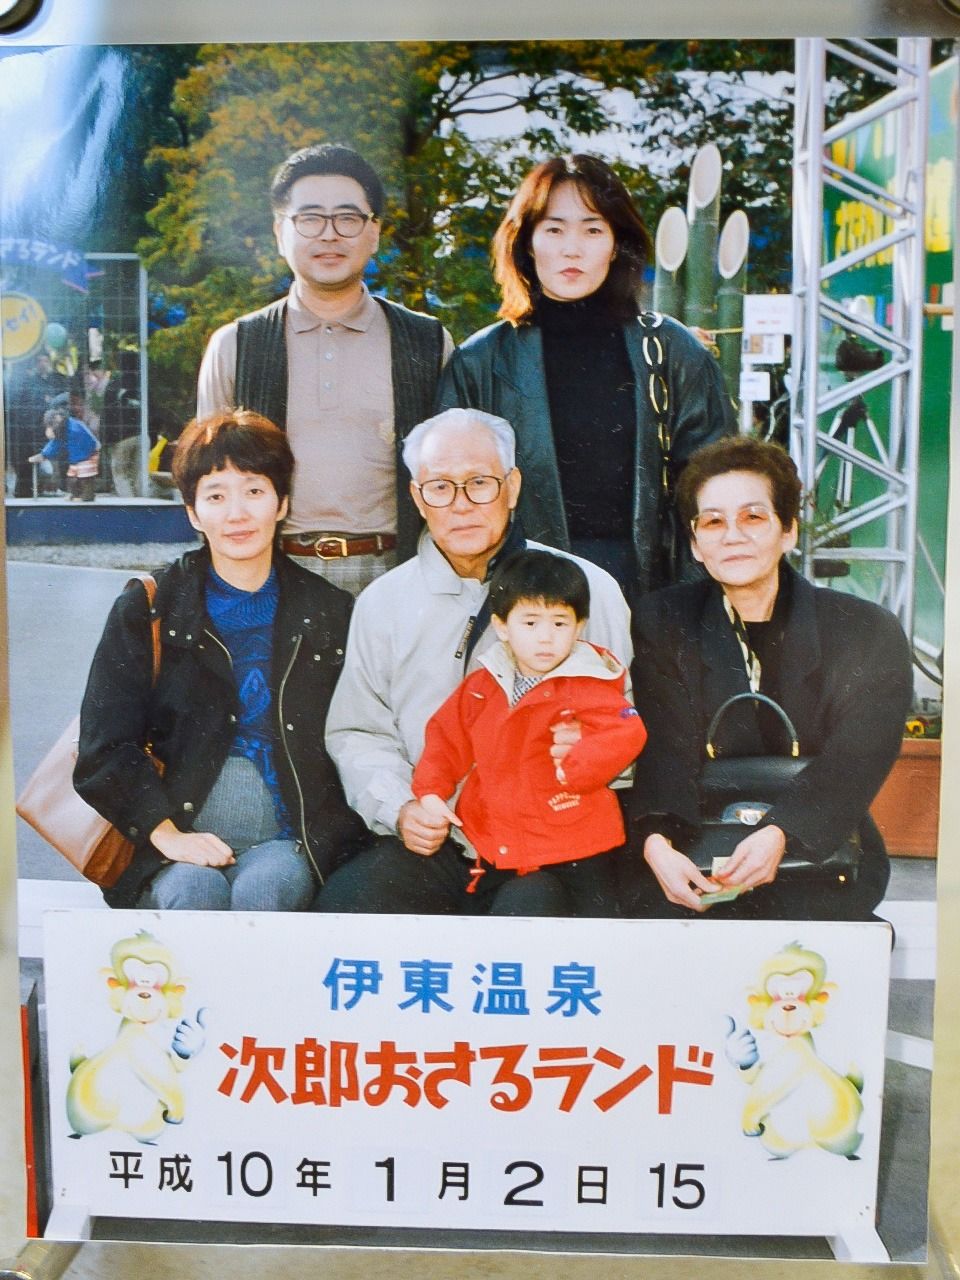 Toshiki as a young boy during an outing with his family. (Courtesy of the Ishii family)